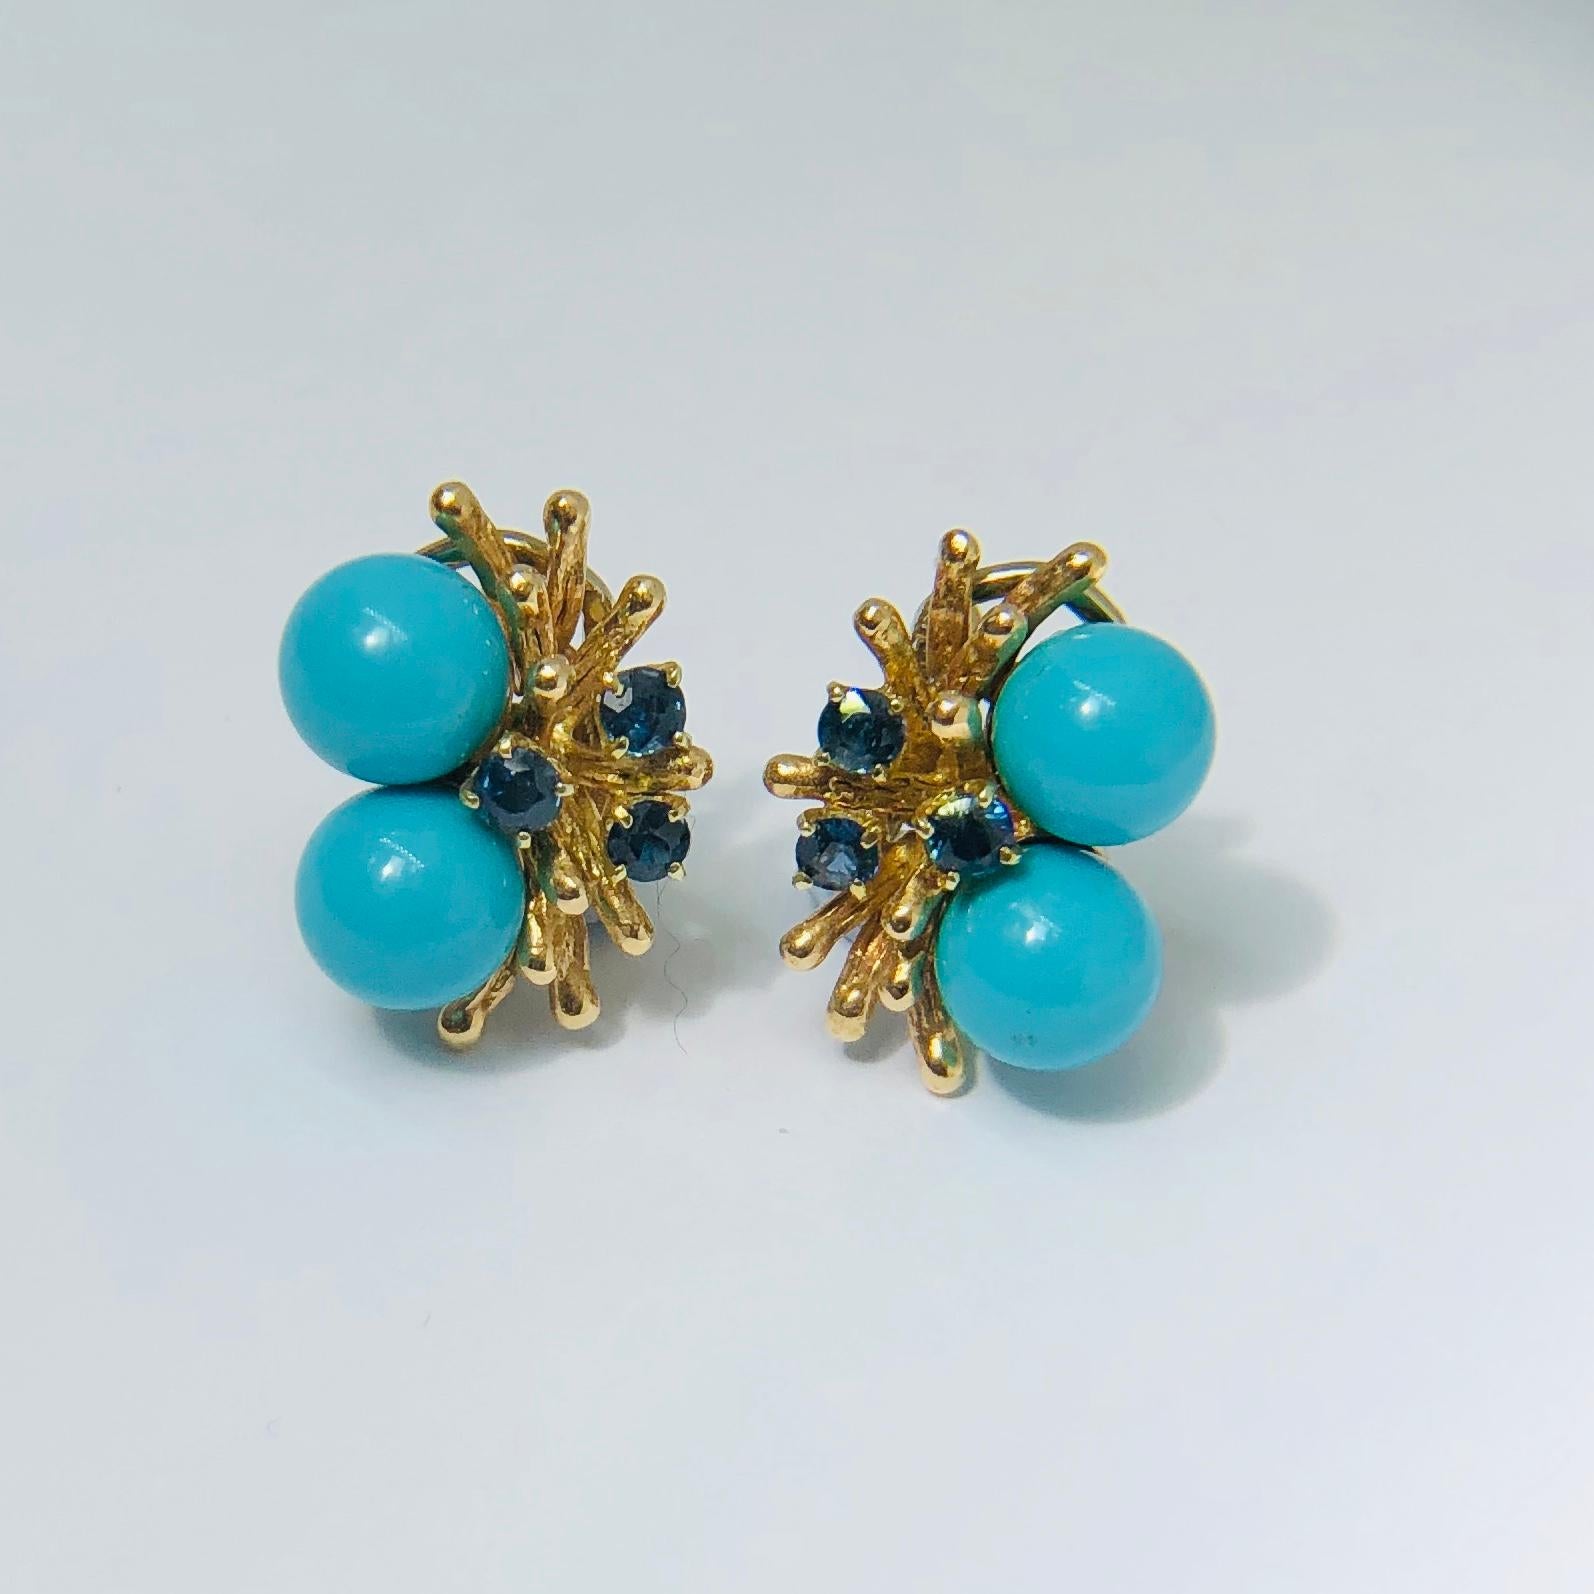 Turquoise and Sapphire Earrings, 14 Carat Yellow Gold 1